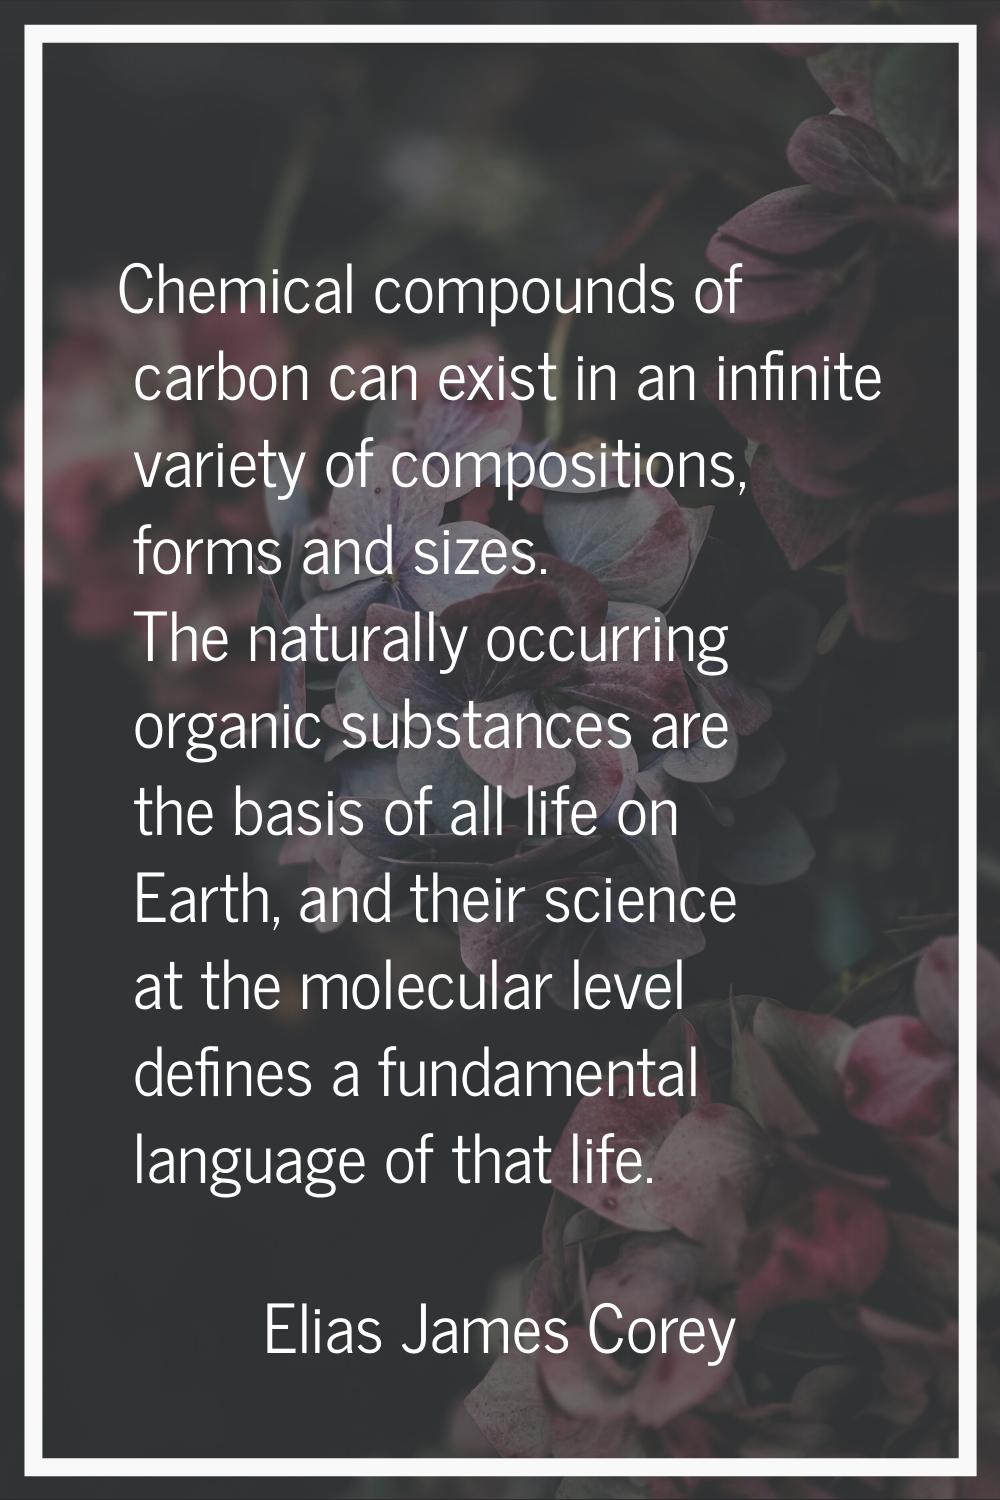 Chemical compounds of carbon can exist in an infinite variety of compositions, forms and sizes. The